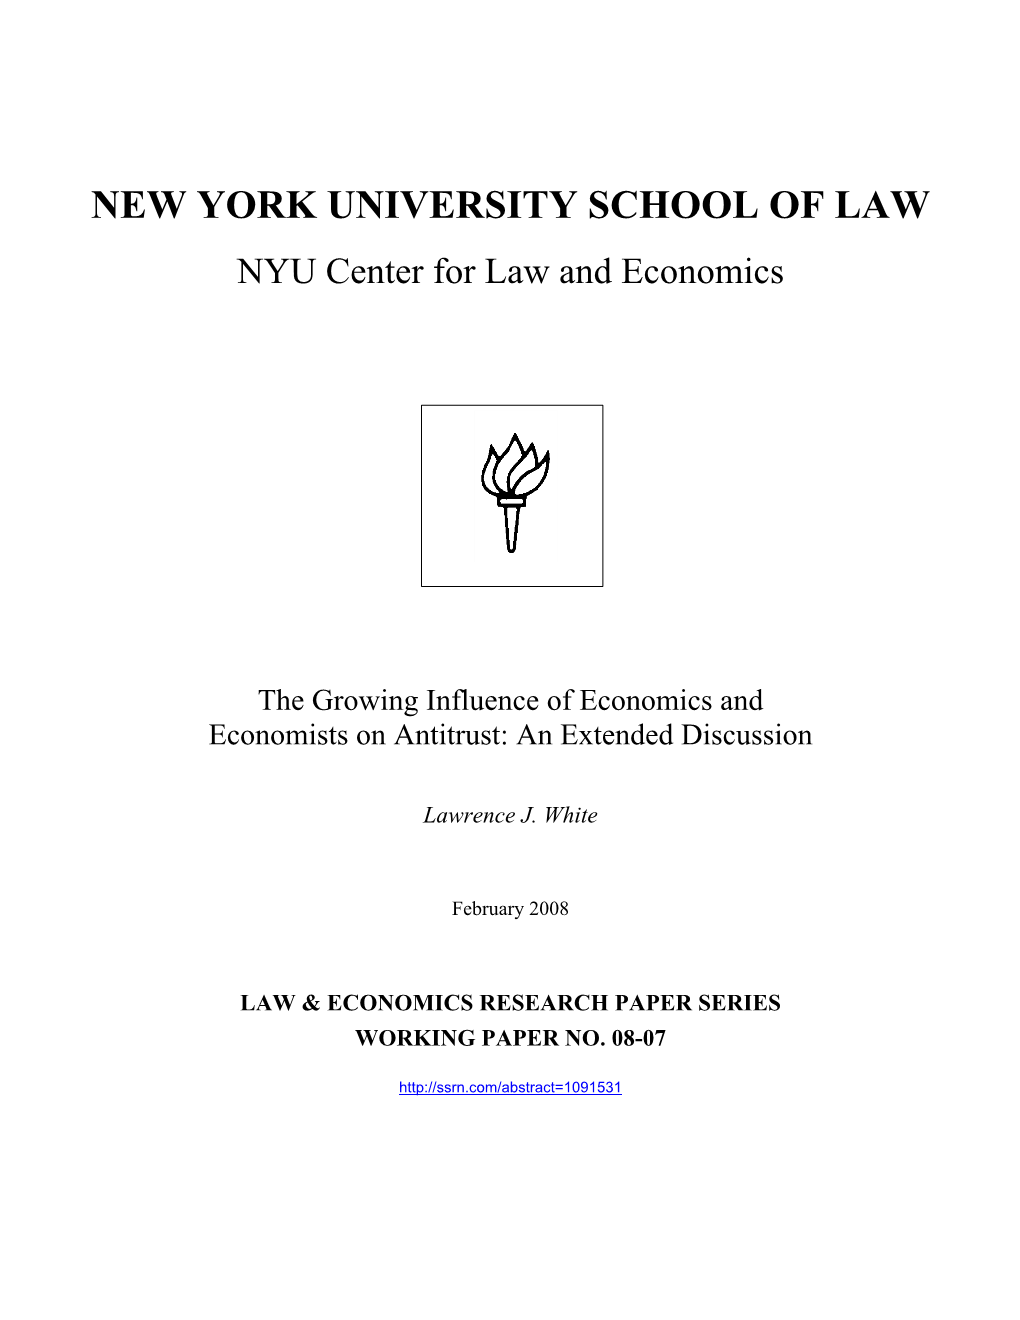 The Growing Influence of Economics and Economists on Antitrust: an Extended Discussion